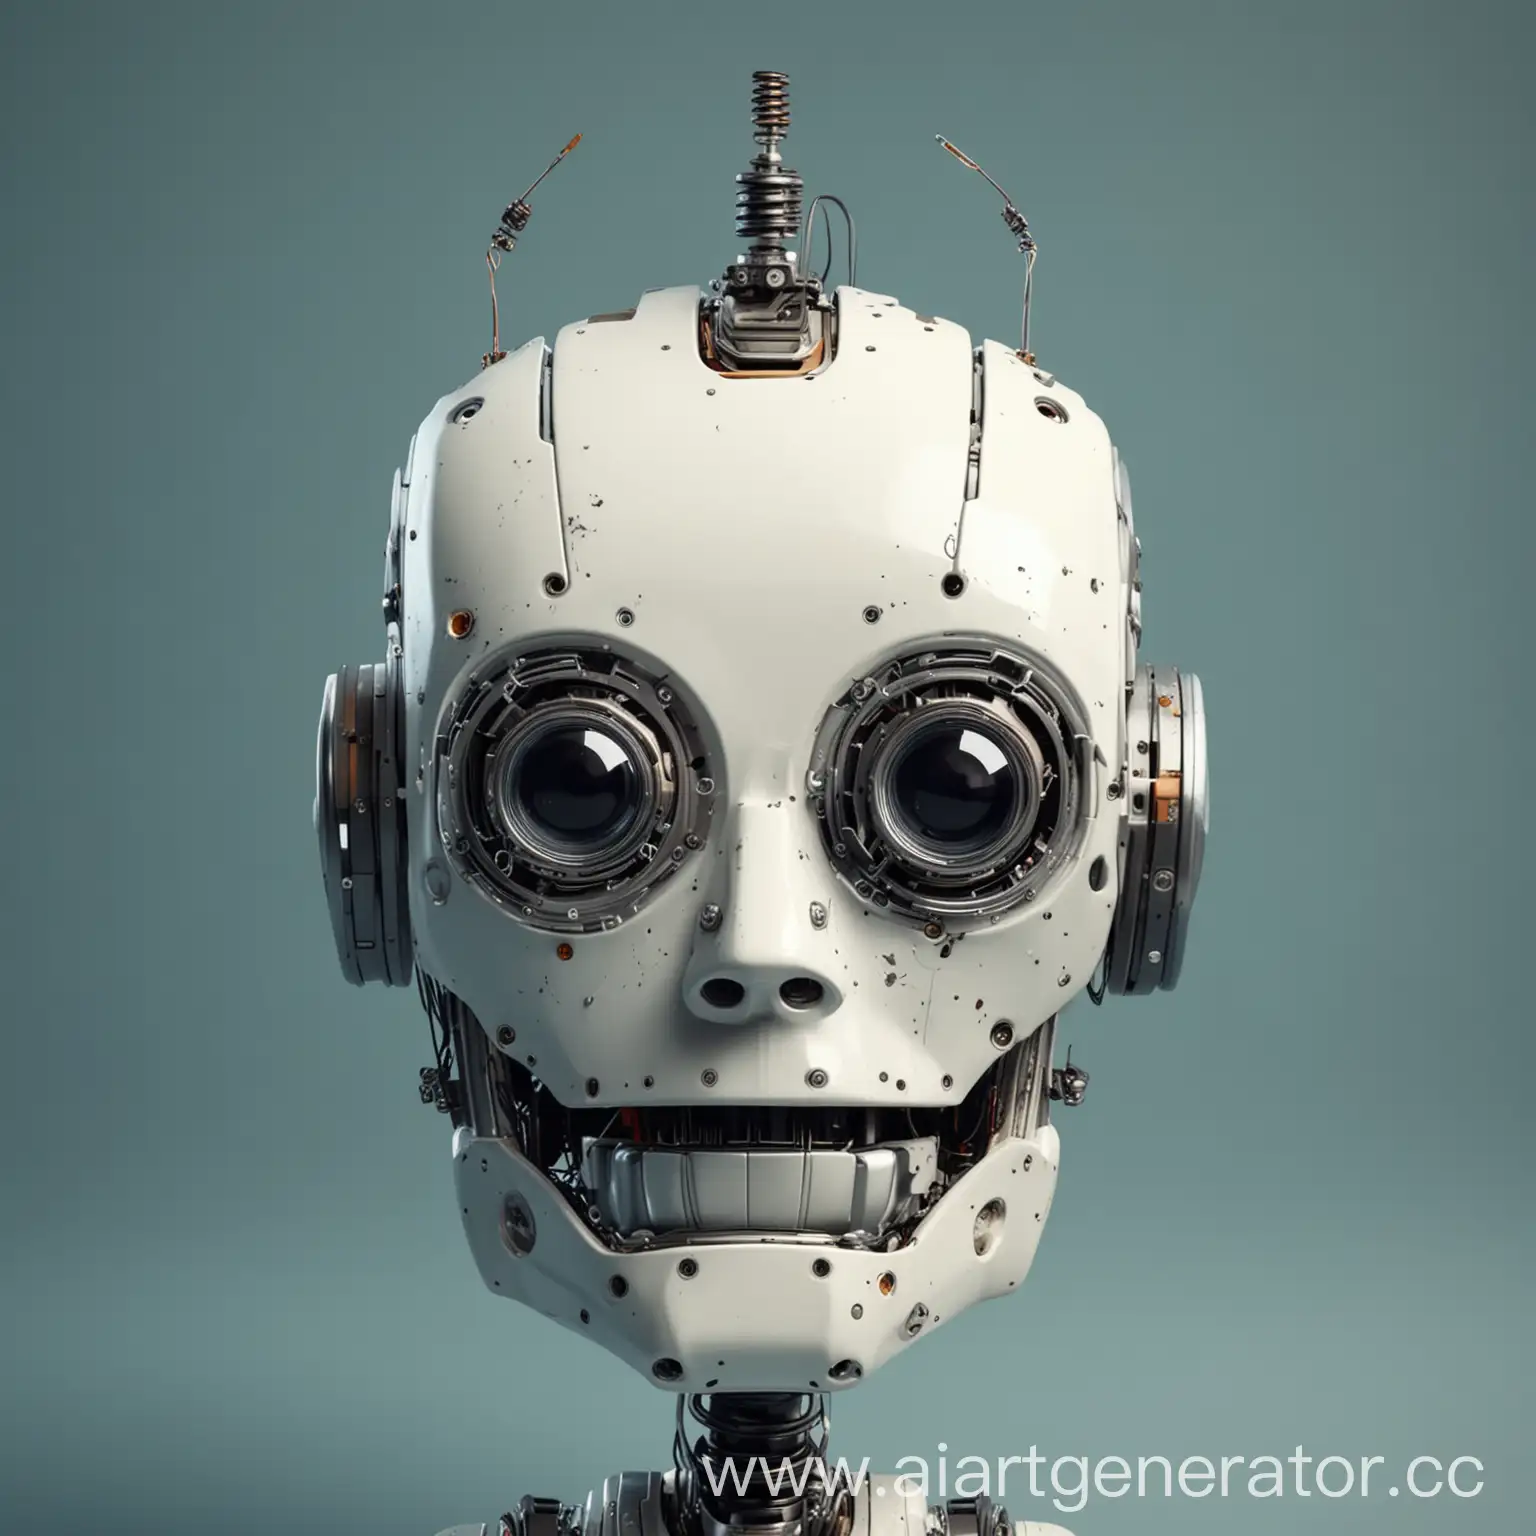 Humorous-Clumsy-Robot-Head-in-Silly-Expression